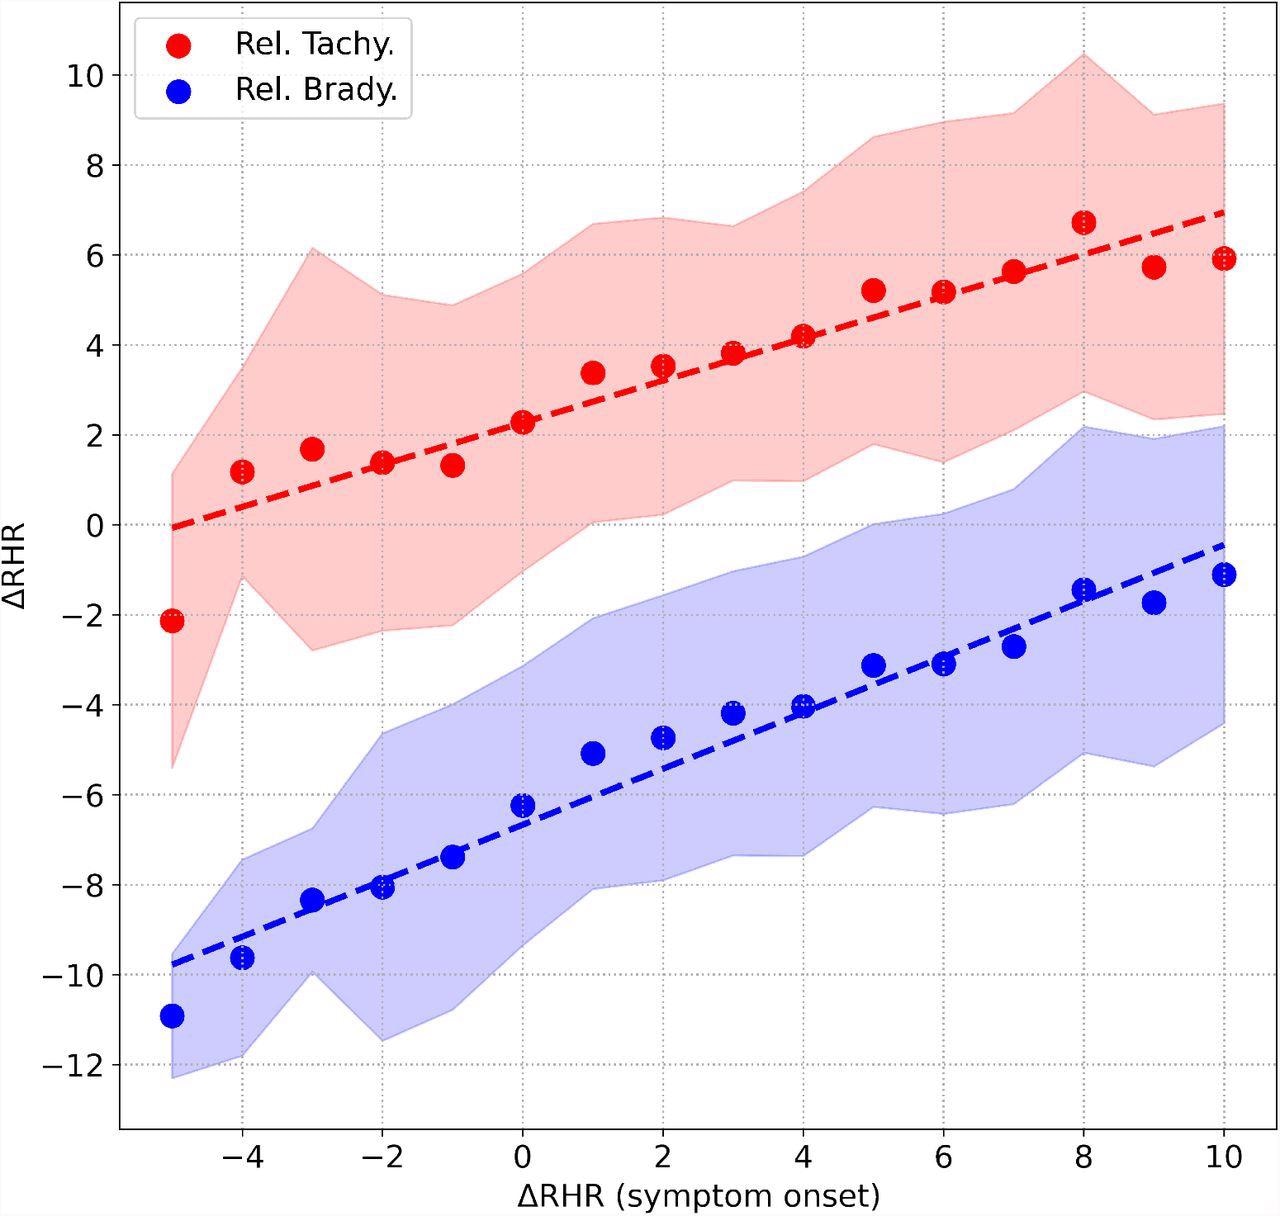 Correlation between the peak value of ΔRHR measured during symptom onset, and (i) peak value of ΔRHR in the second relative tachycardia window shown in red, (ii) minimum value of ΔRHR measured in the relative bradycardia window shown in blue. The shaded areas represent the 1 standard deviation range.